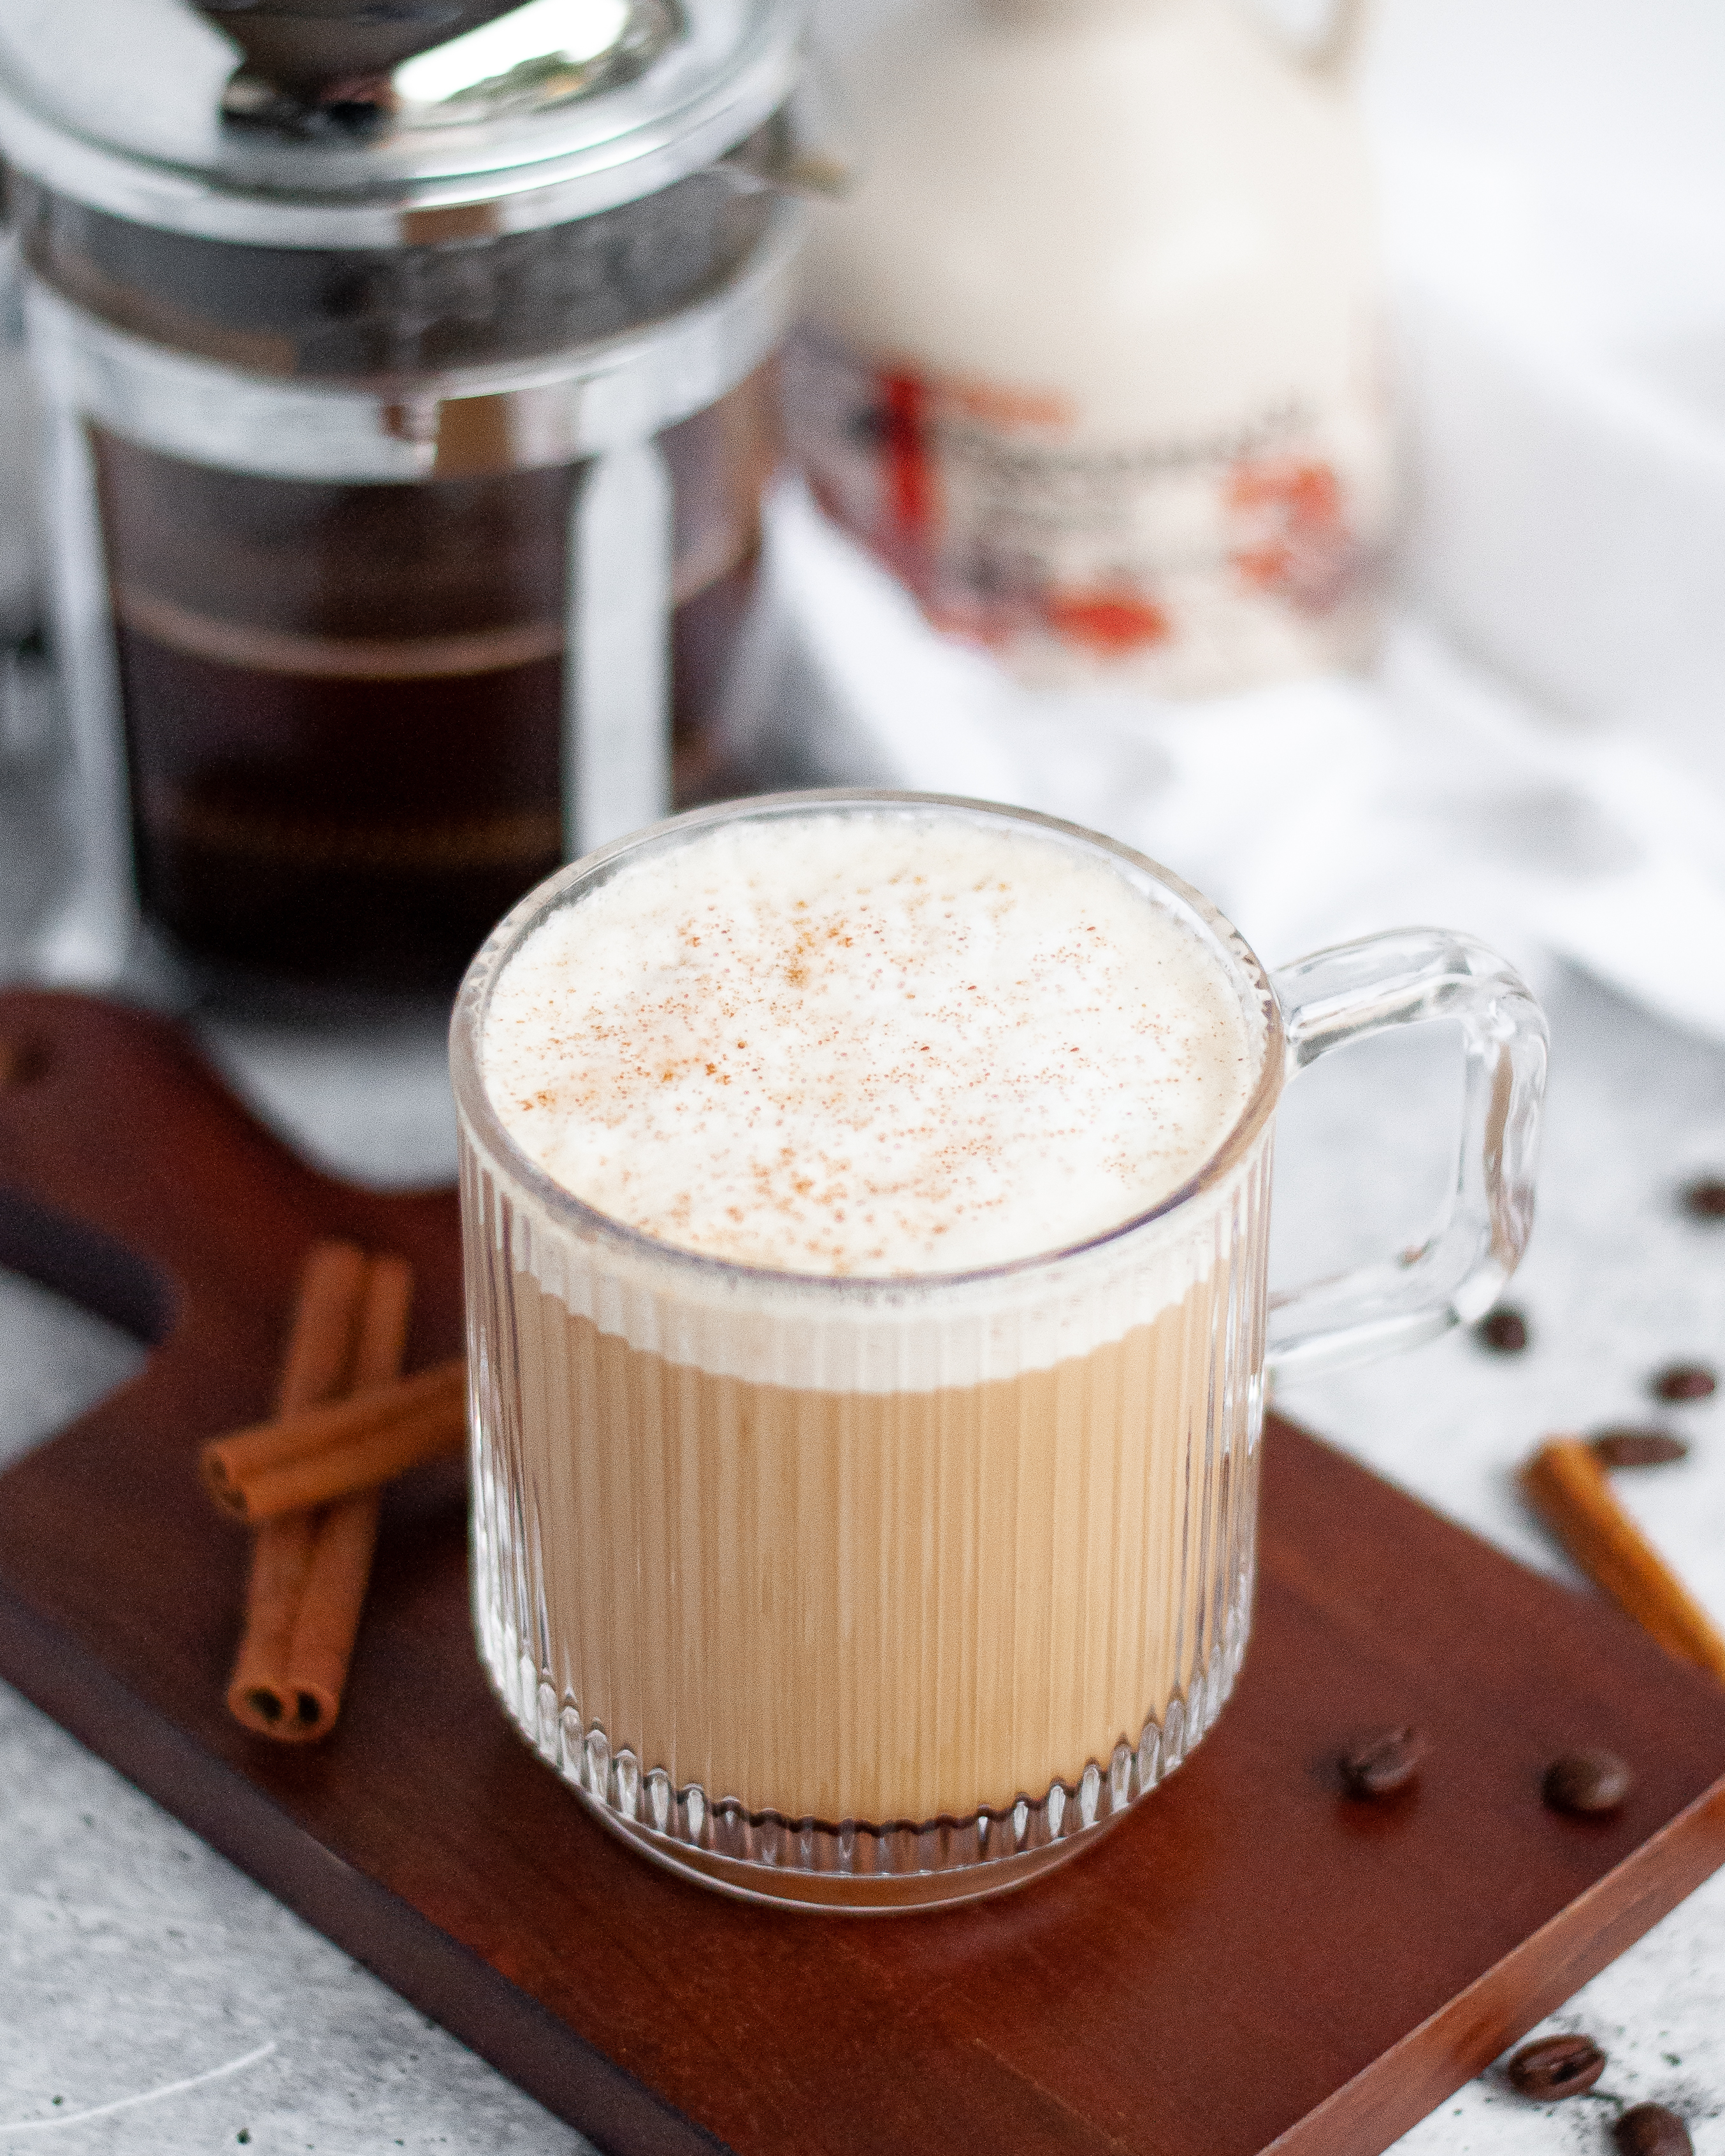 Glass mug filled with a hot maple cinnamon coffee with collagen. The maple cinnamon latte is sitting on a wooden board with coffee beans, cinnamon sticks, a jug of maple syrup, a french press, and a white napkin surrounding it.